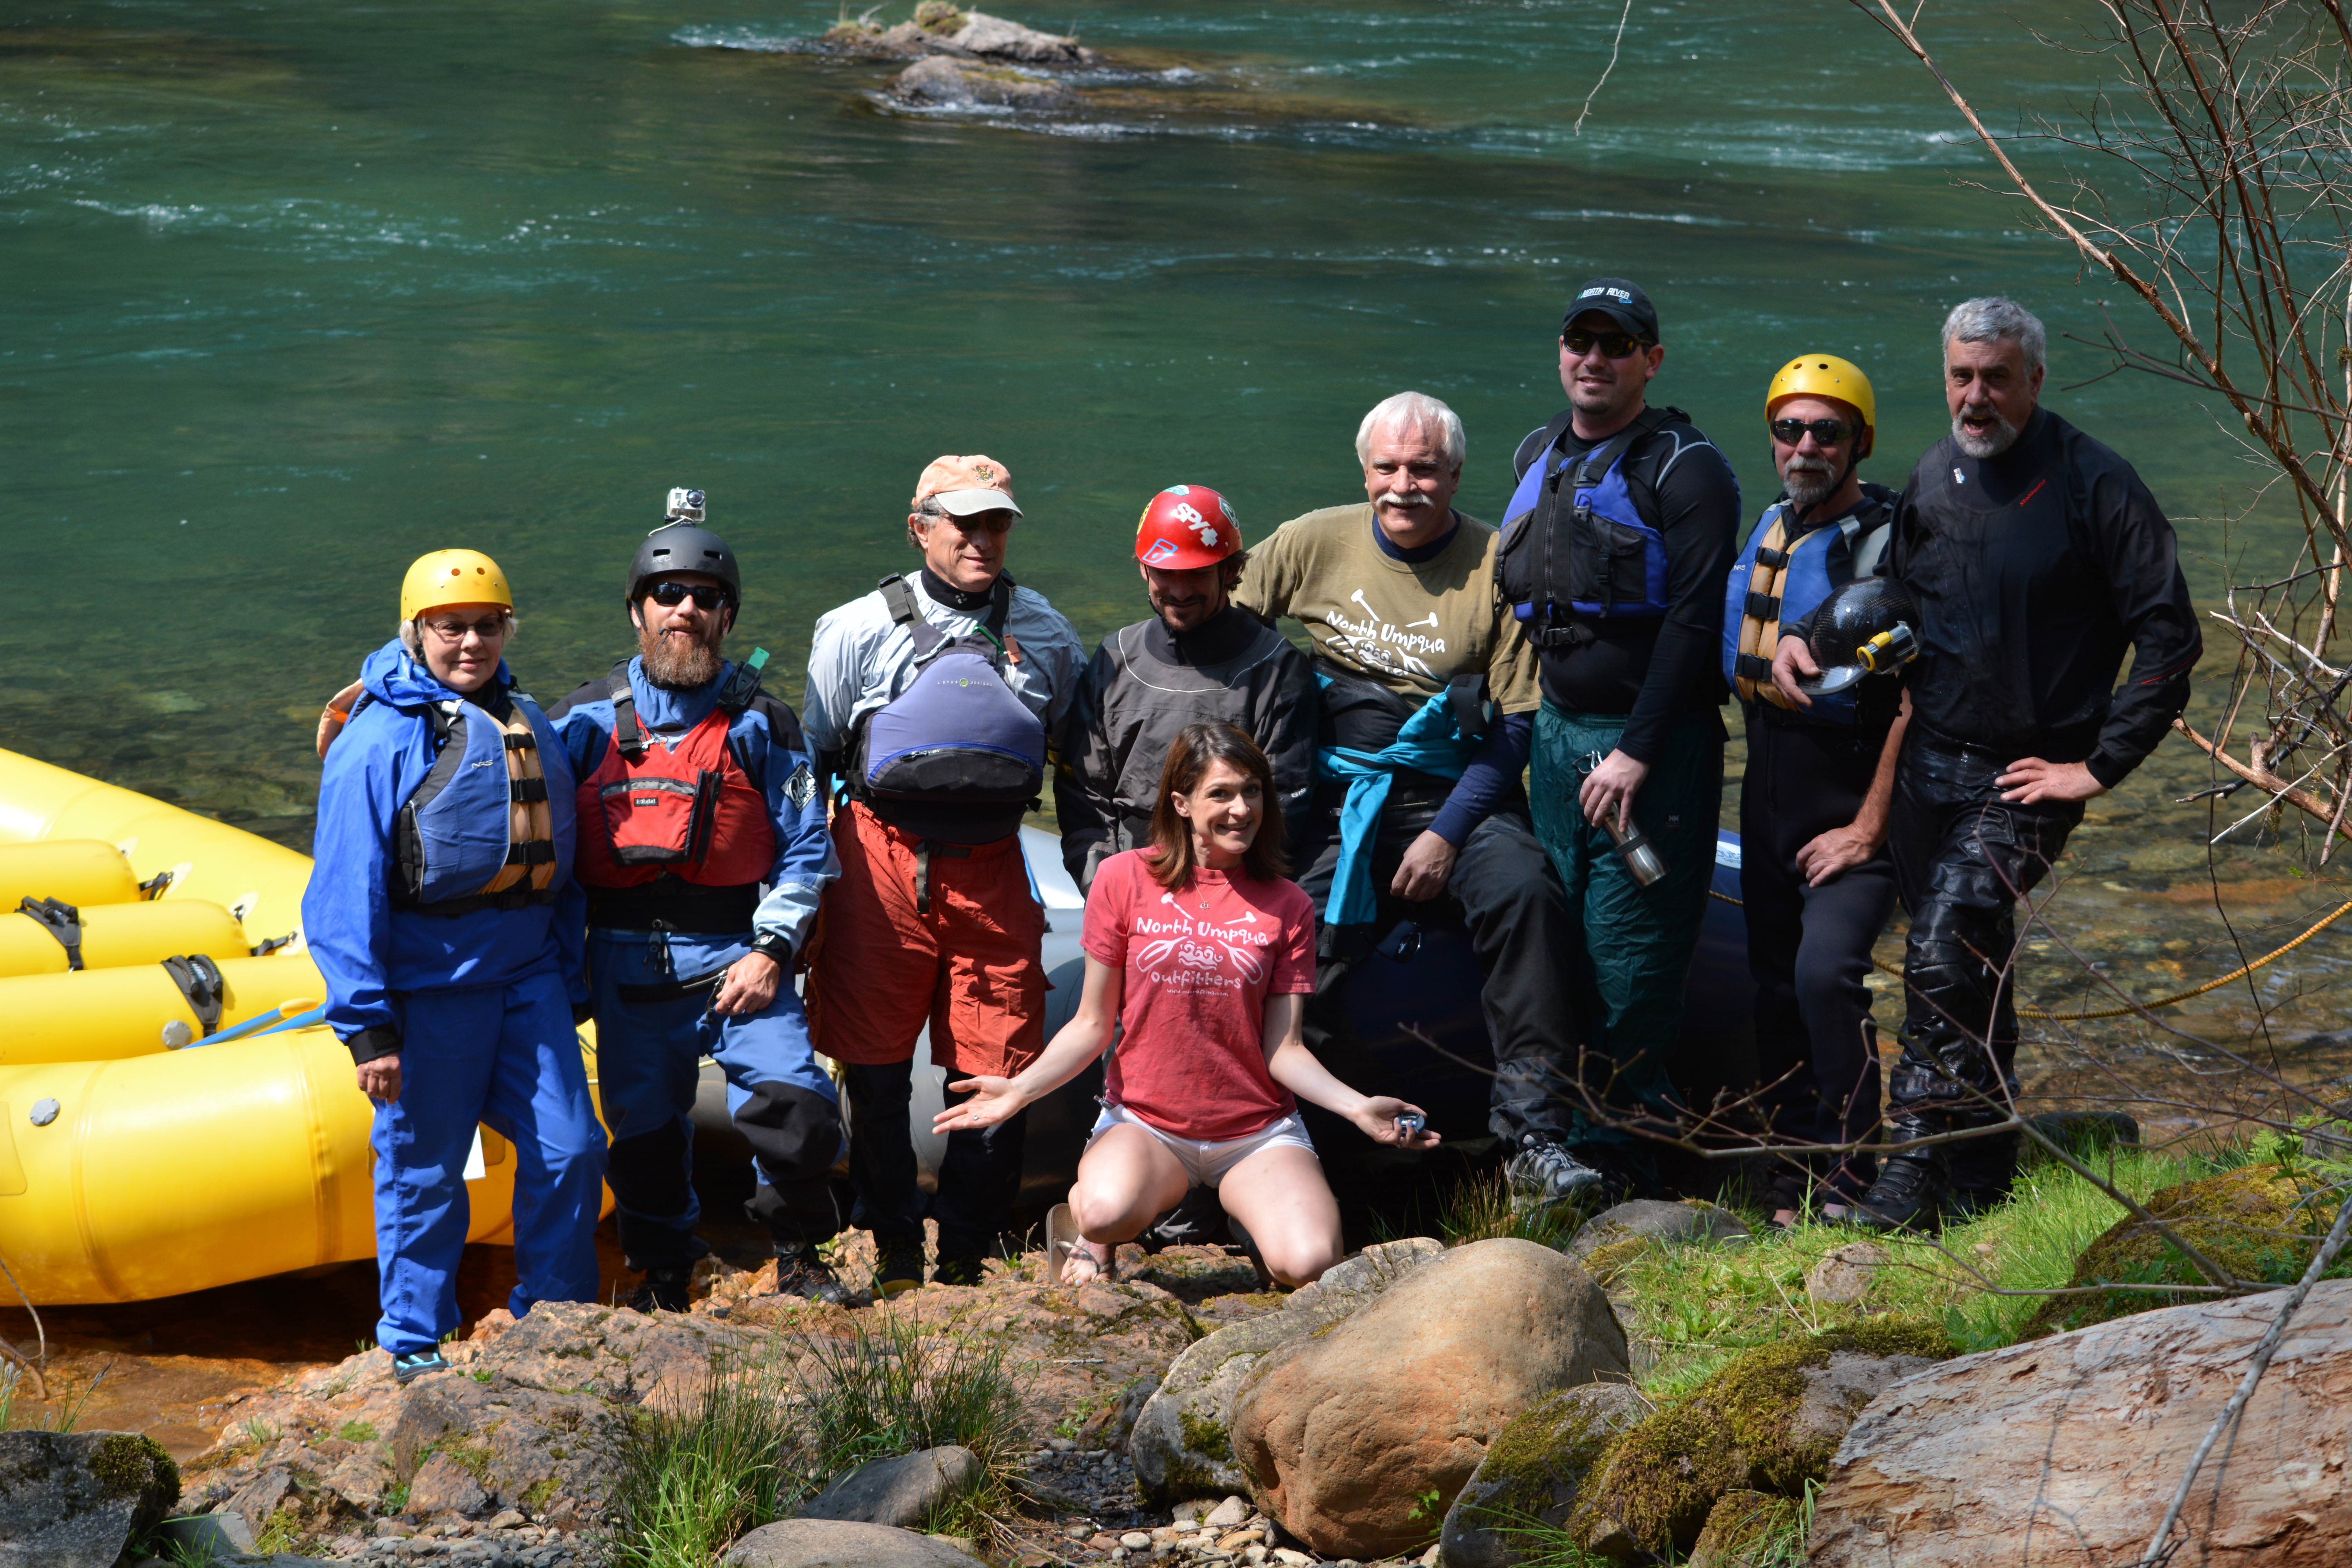 Guides and support crew. At North Umpqua Outfitters.